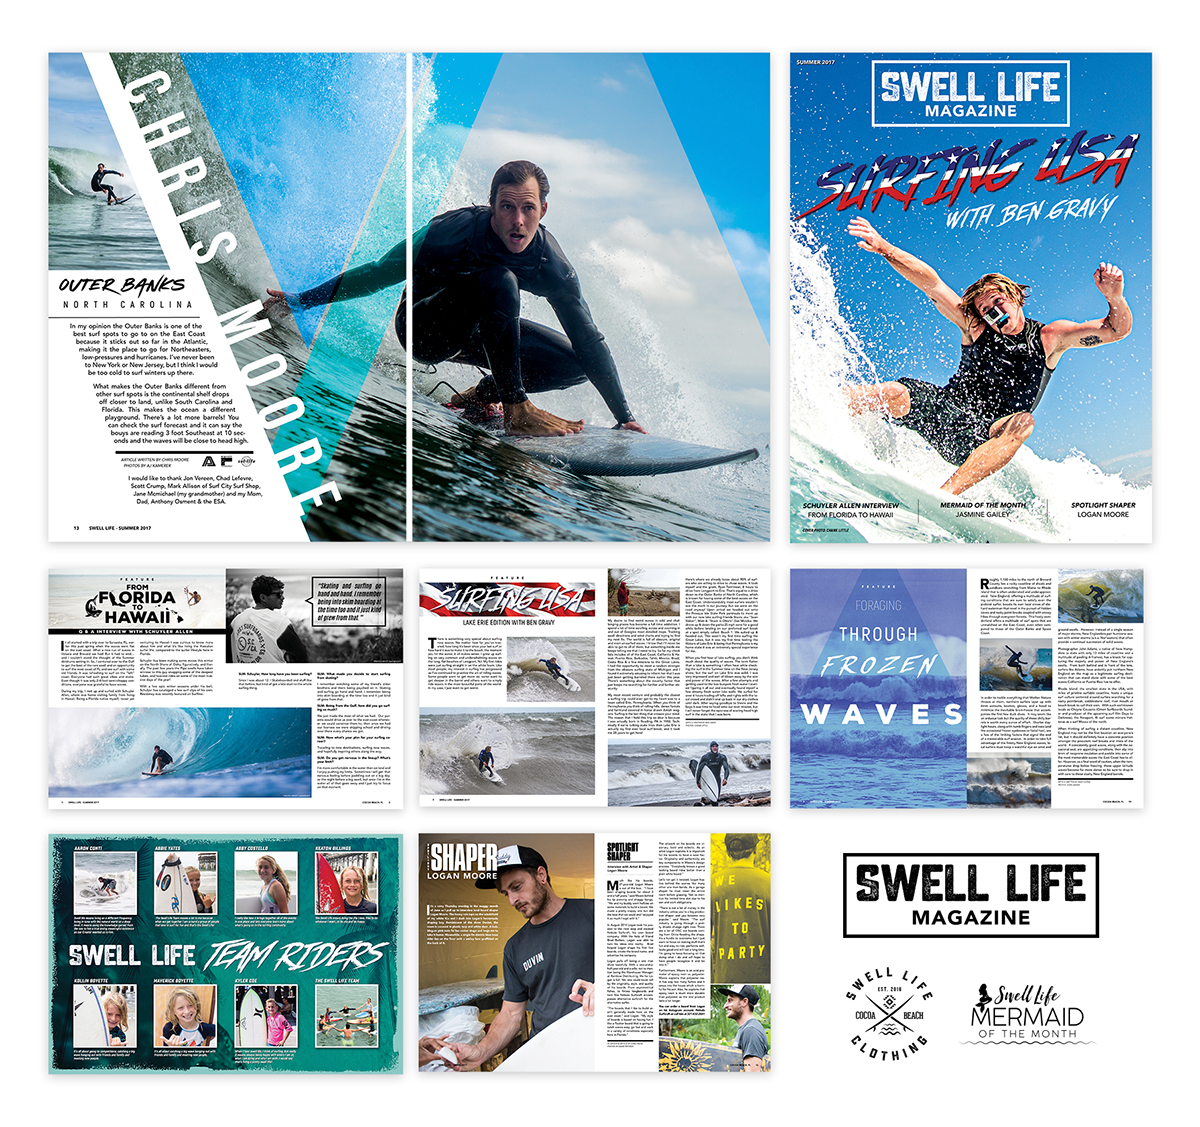 Swell Life layout design showcase for issue 4